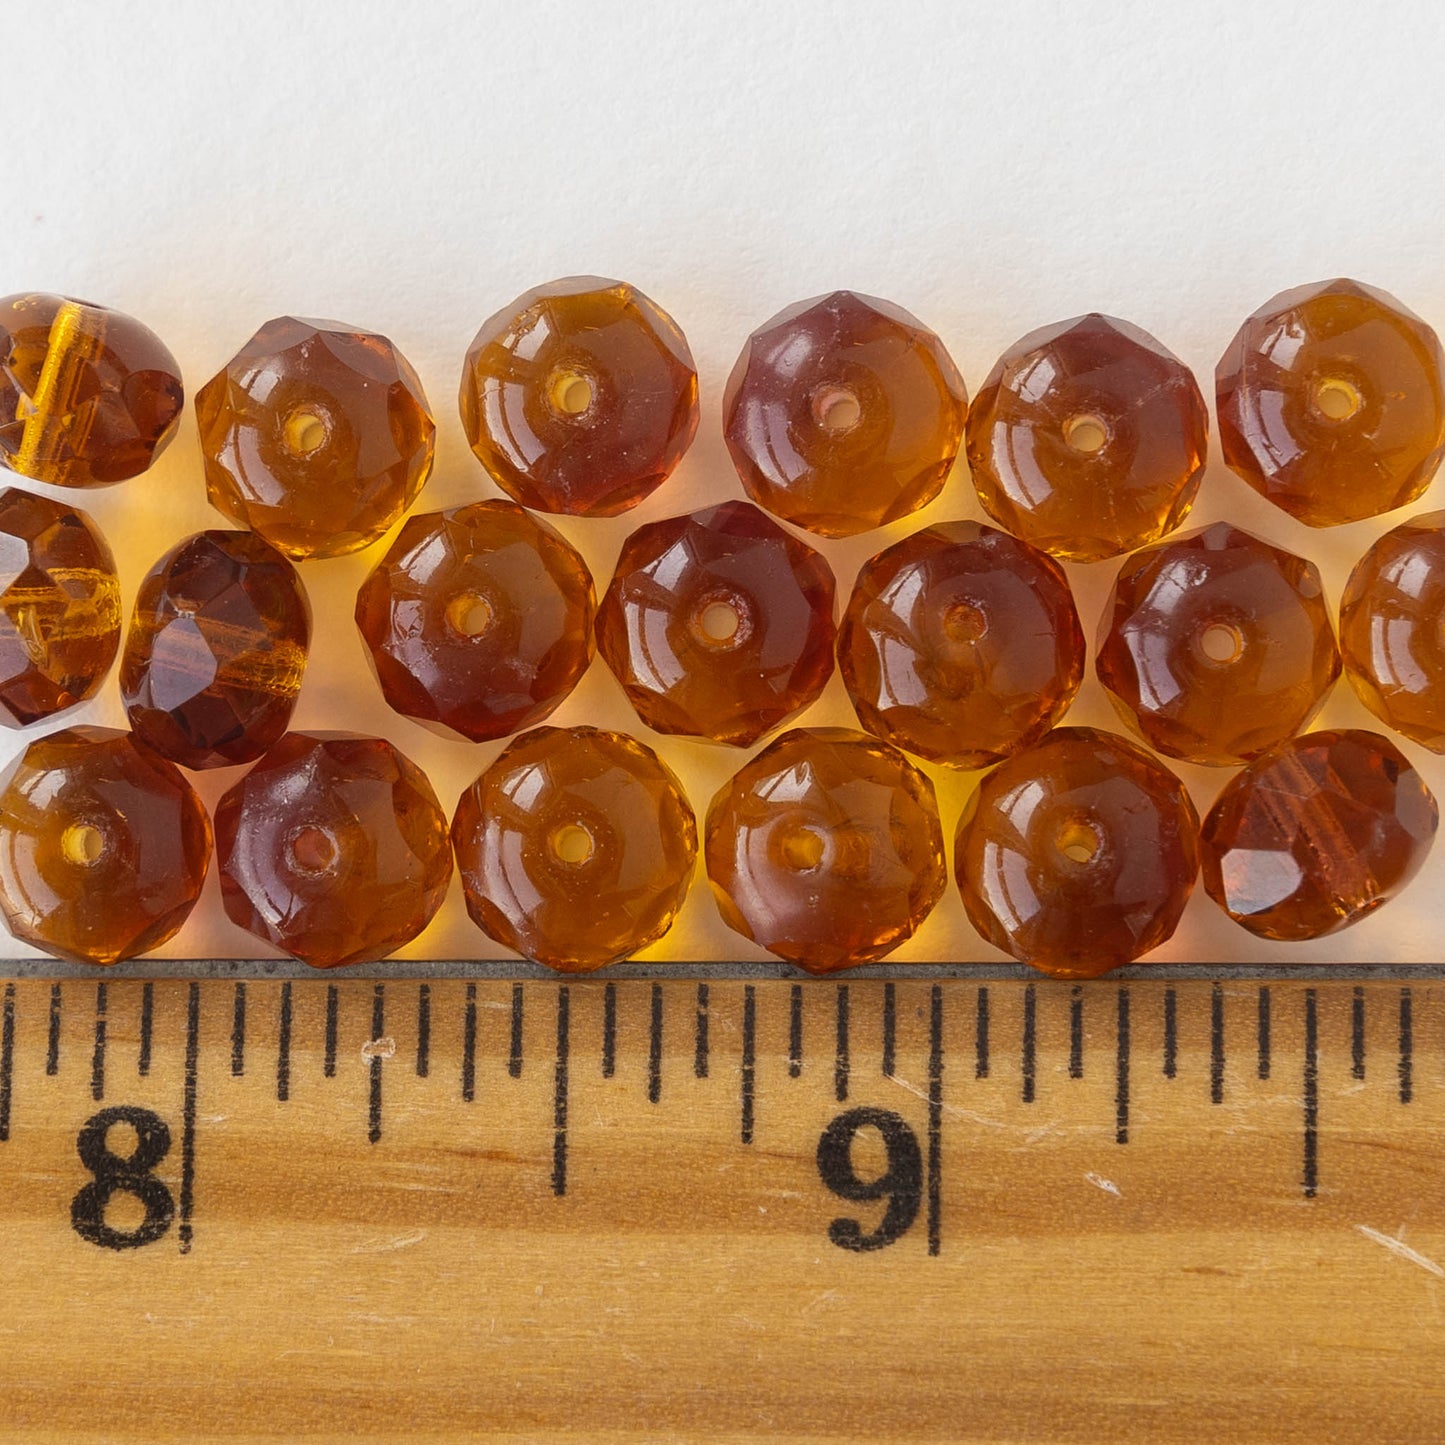 6x9mm Rondelle Beads - Amethyst Amber - 19 Beads